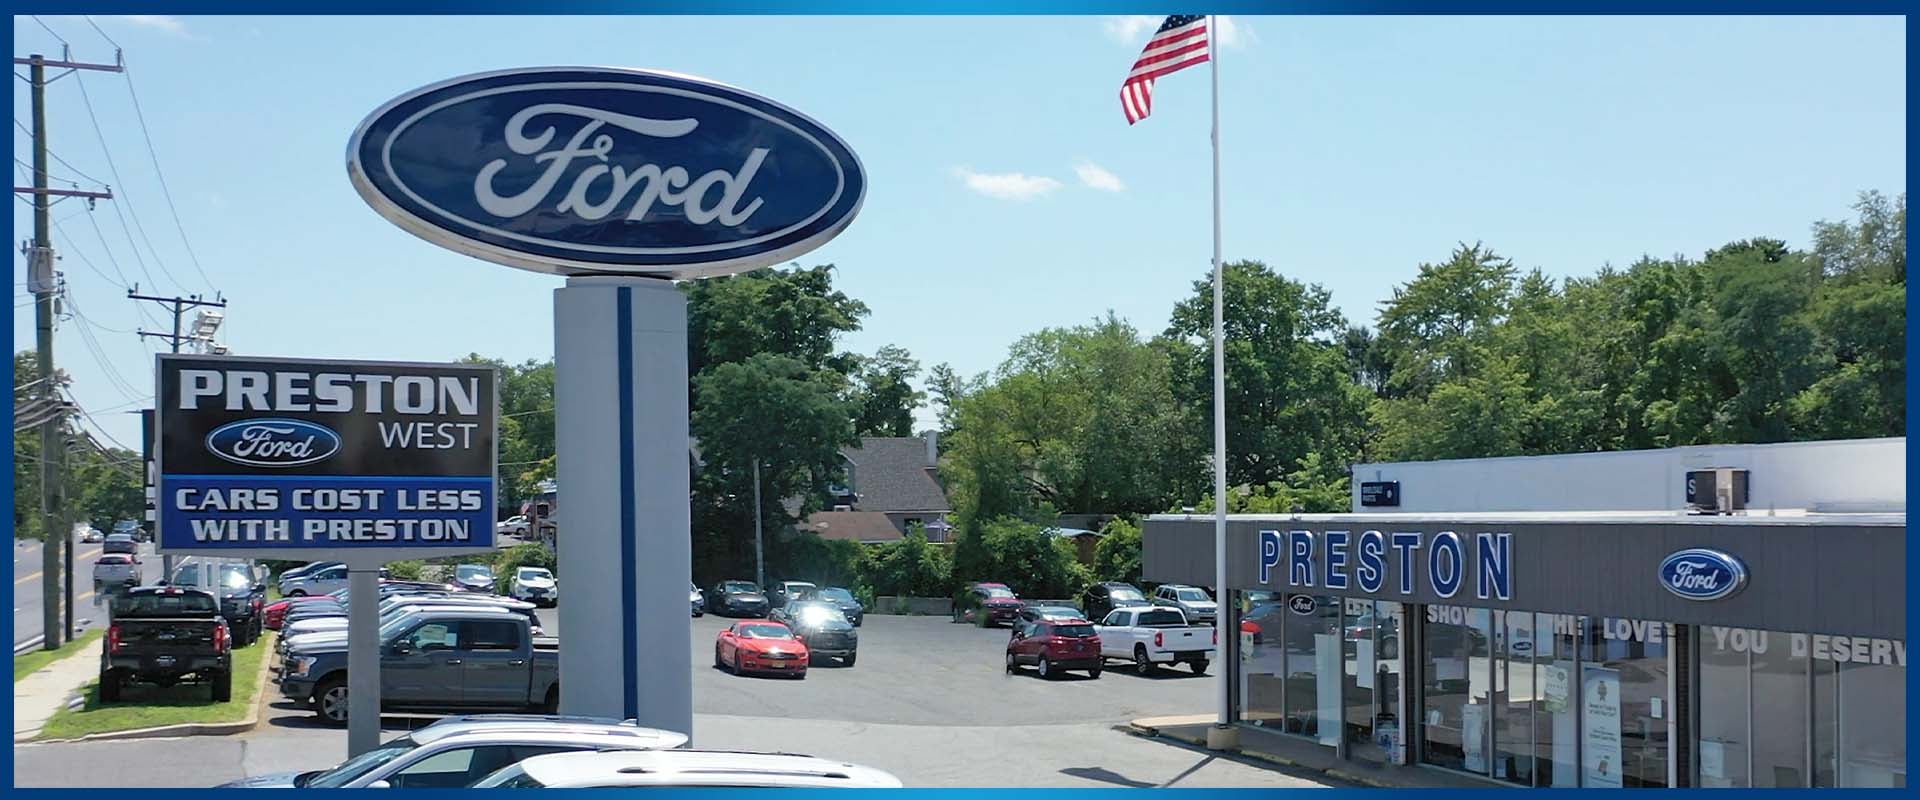 Your Ford Dealer Near Baltimore | Preston Ford West | Ford In MD